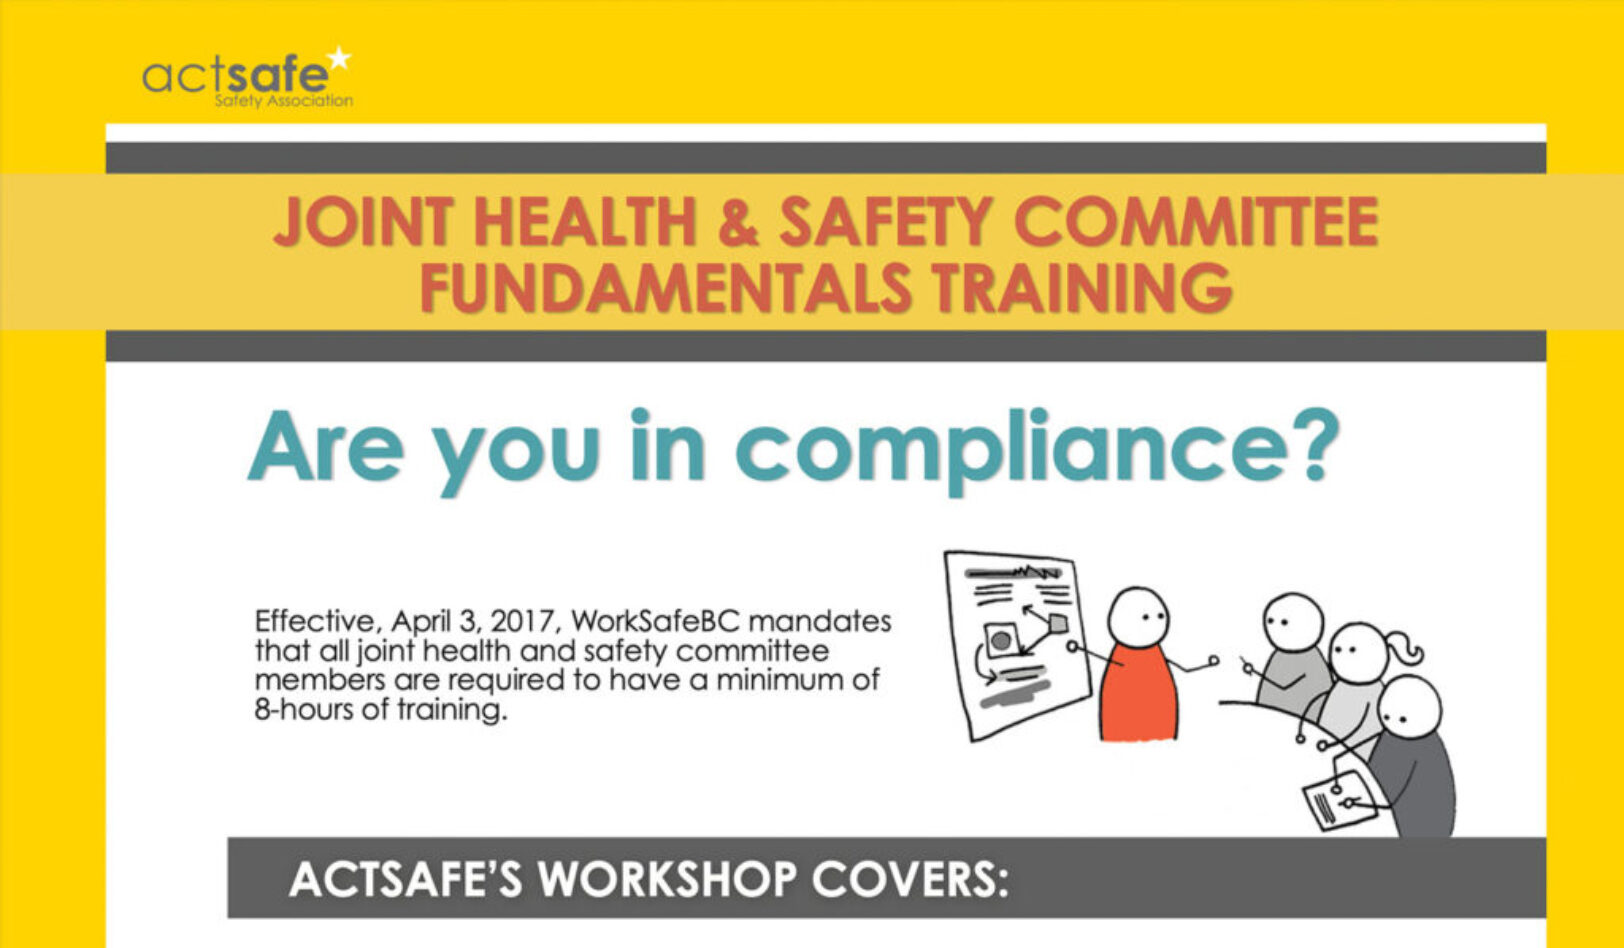 Joint Health & Safety Committee Fundamentals Training